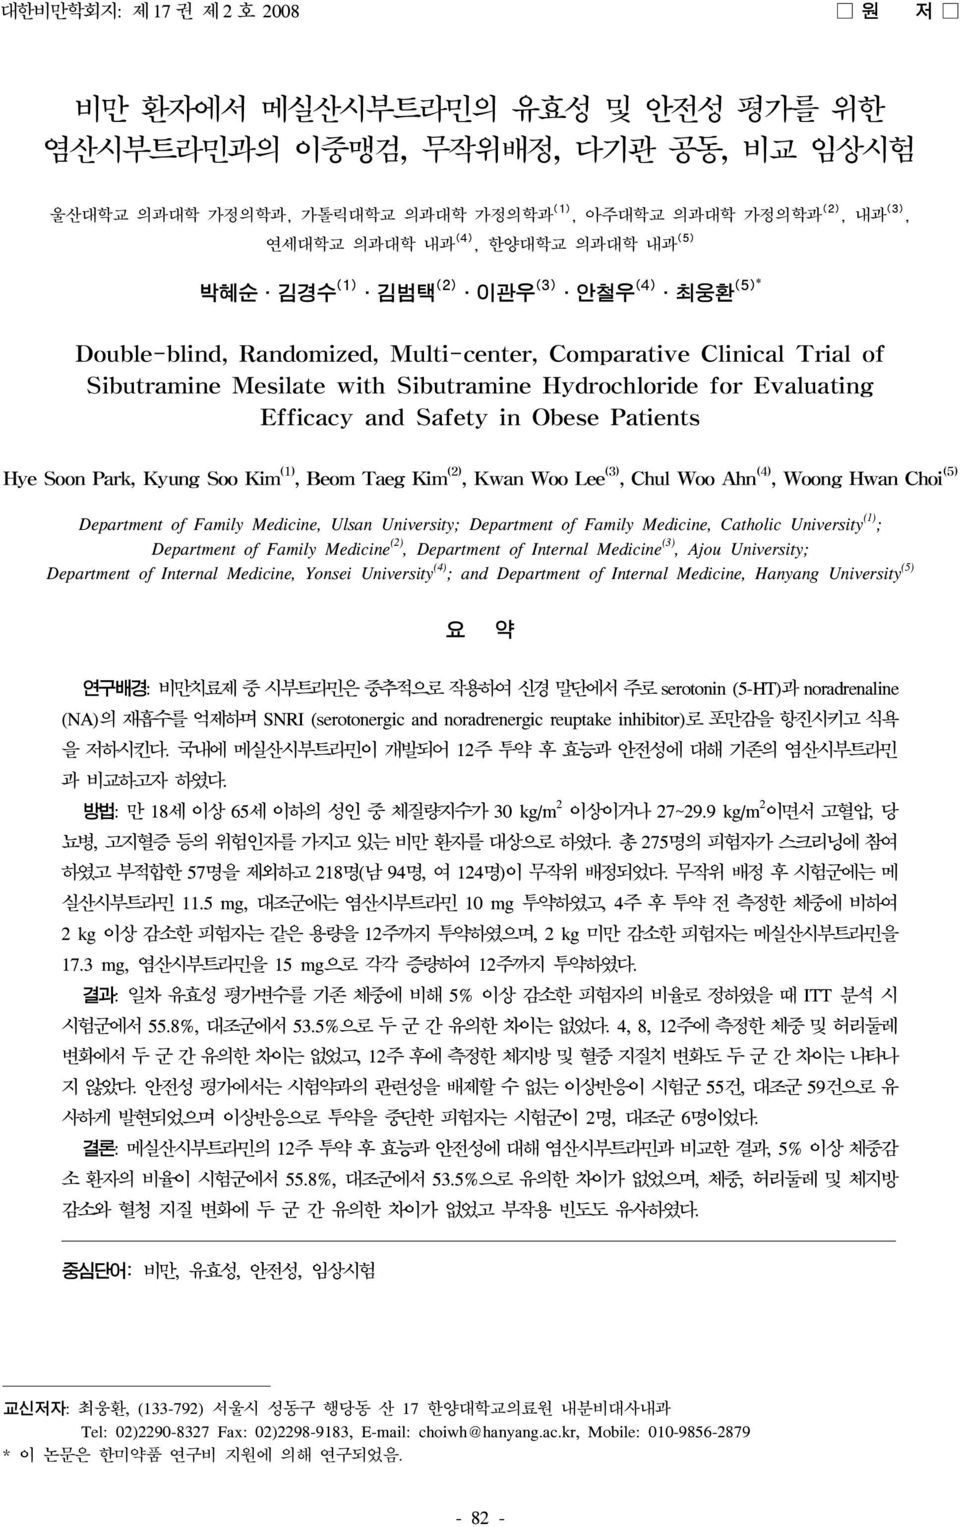 Efficacy and Safety in Obese Patients Hye Soon Park, Kyung Soo Kim (1), Beom Taeg Kim (2), Kwan Woo Lee (3), Chul Woo Ahn (4), Woong Hwan Choi (5) Department of Family Medicine, Ulsan University;